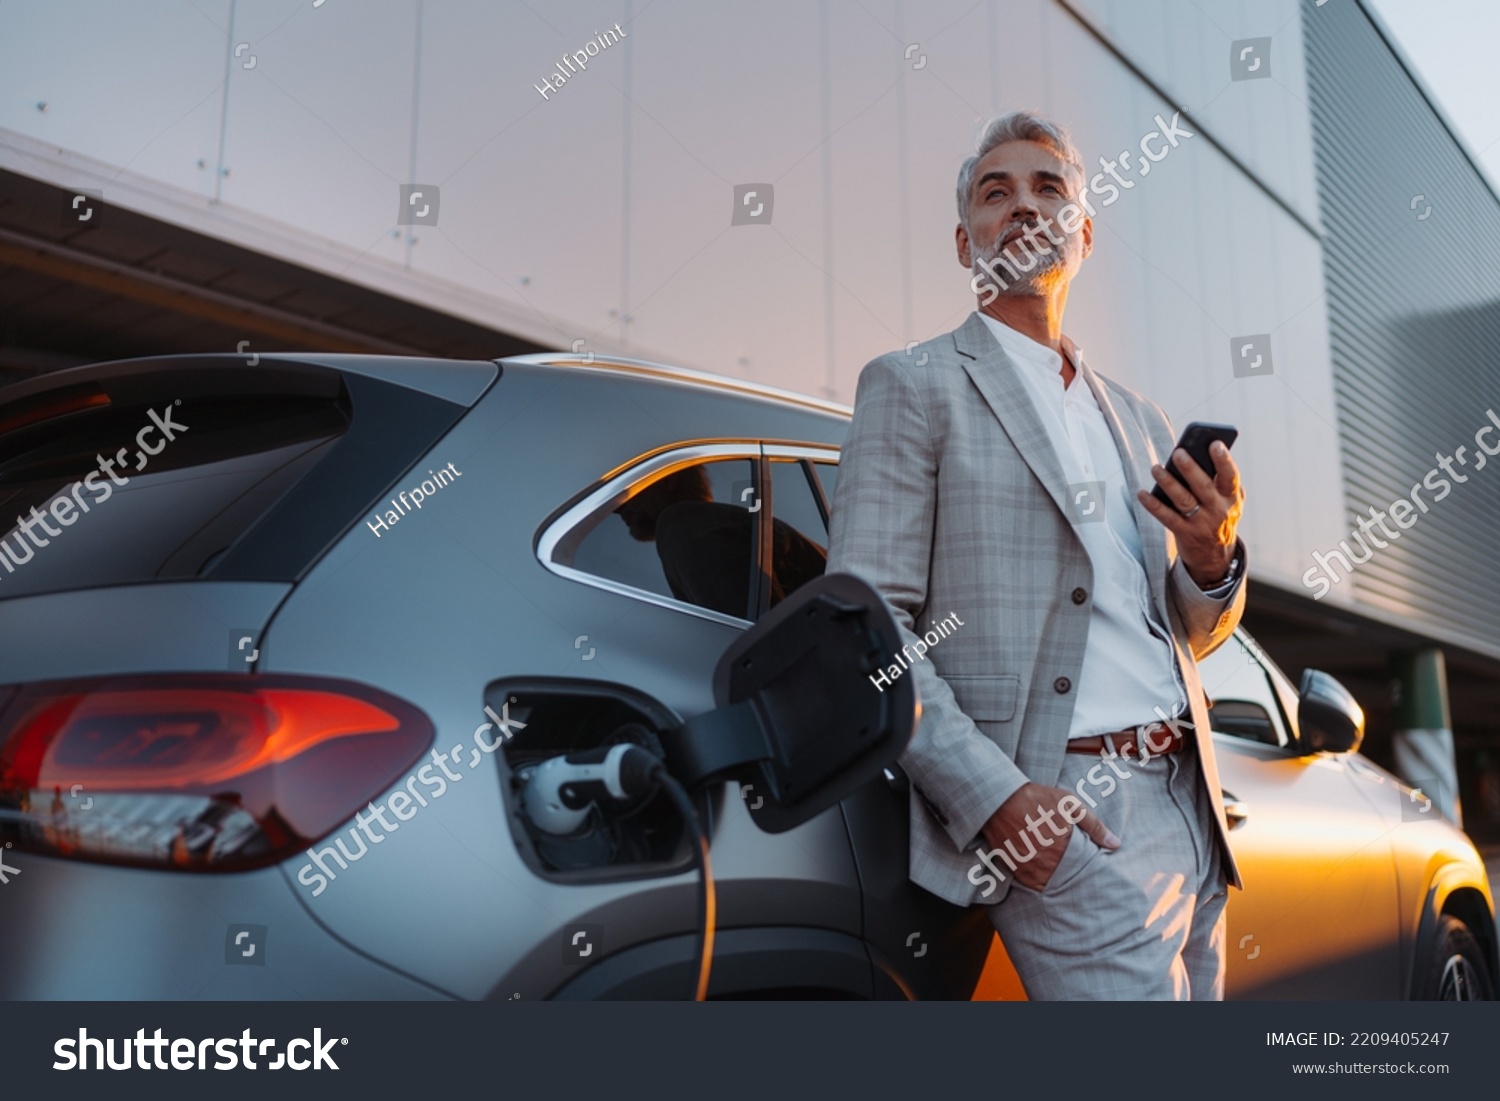 Businessman holding smartphone while charging car at electric vehicle charging station, closeup. #2209405247